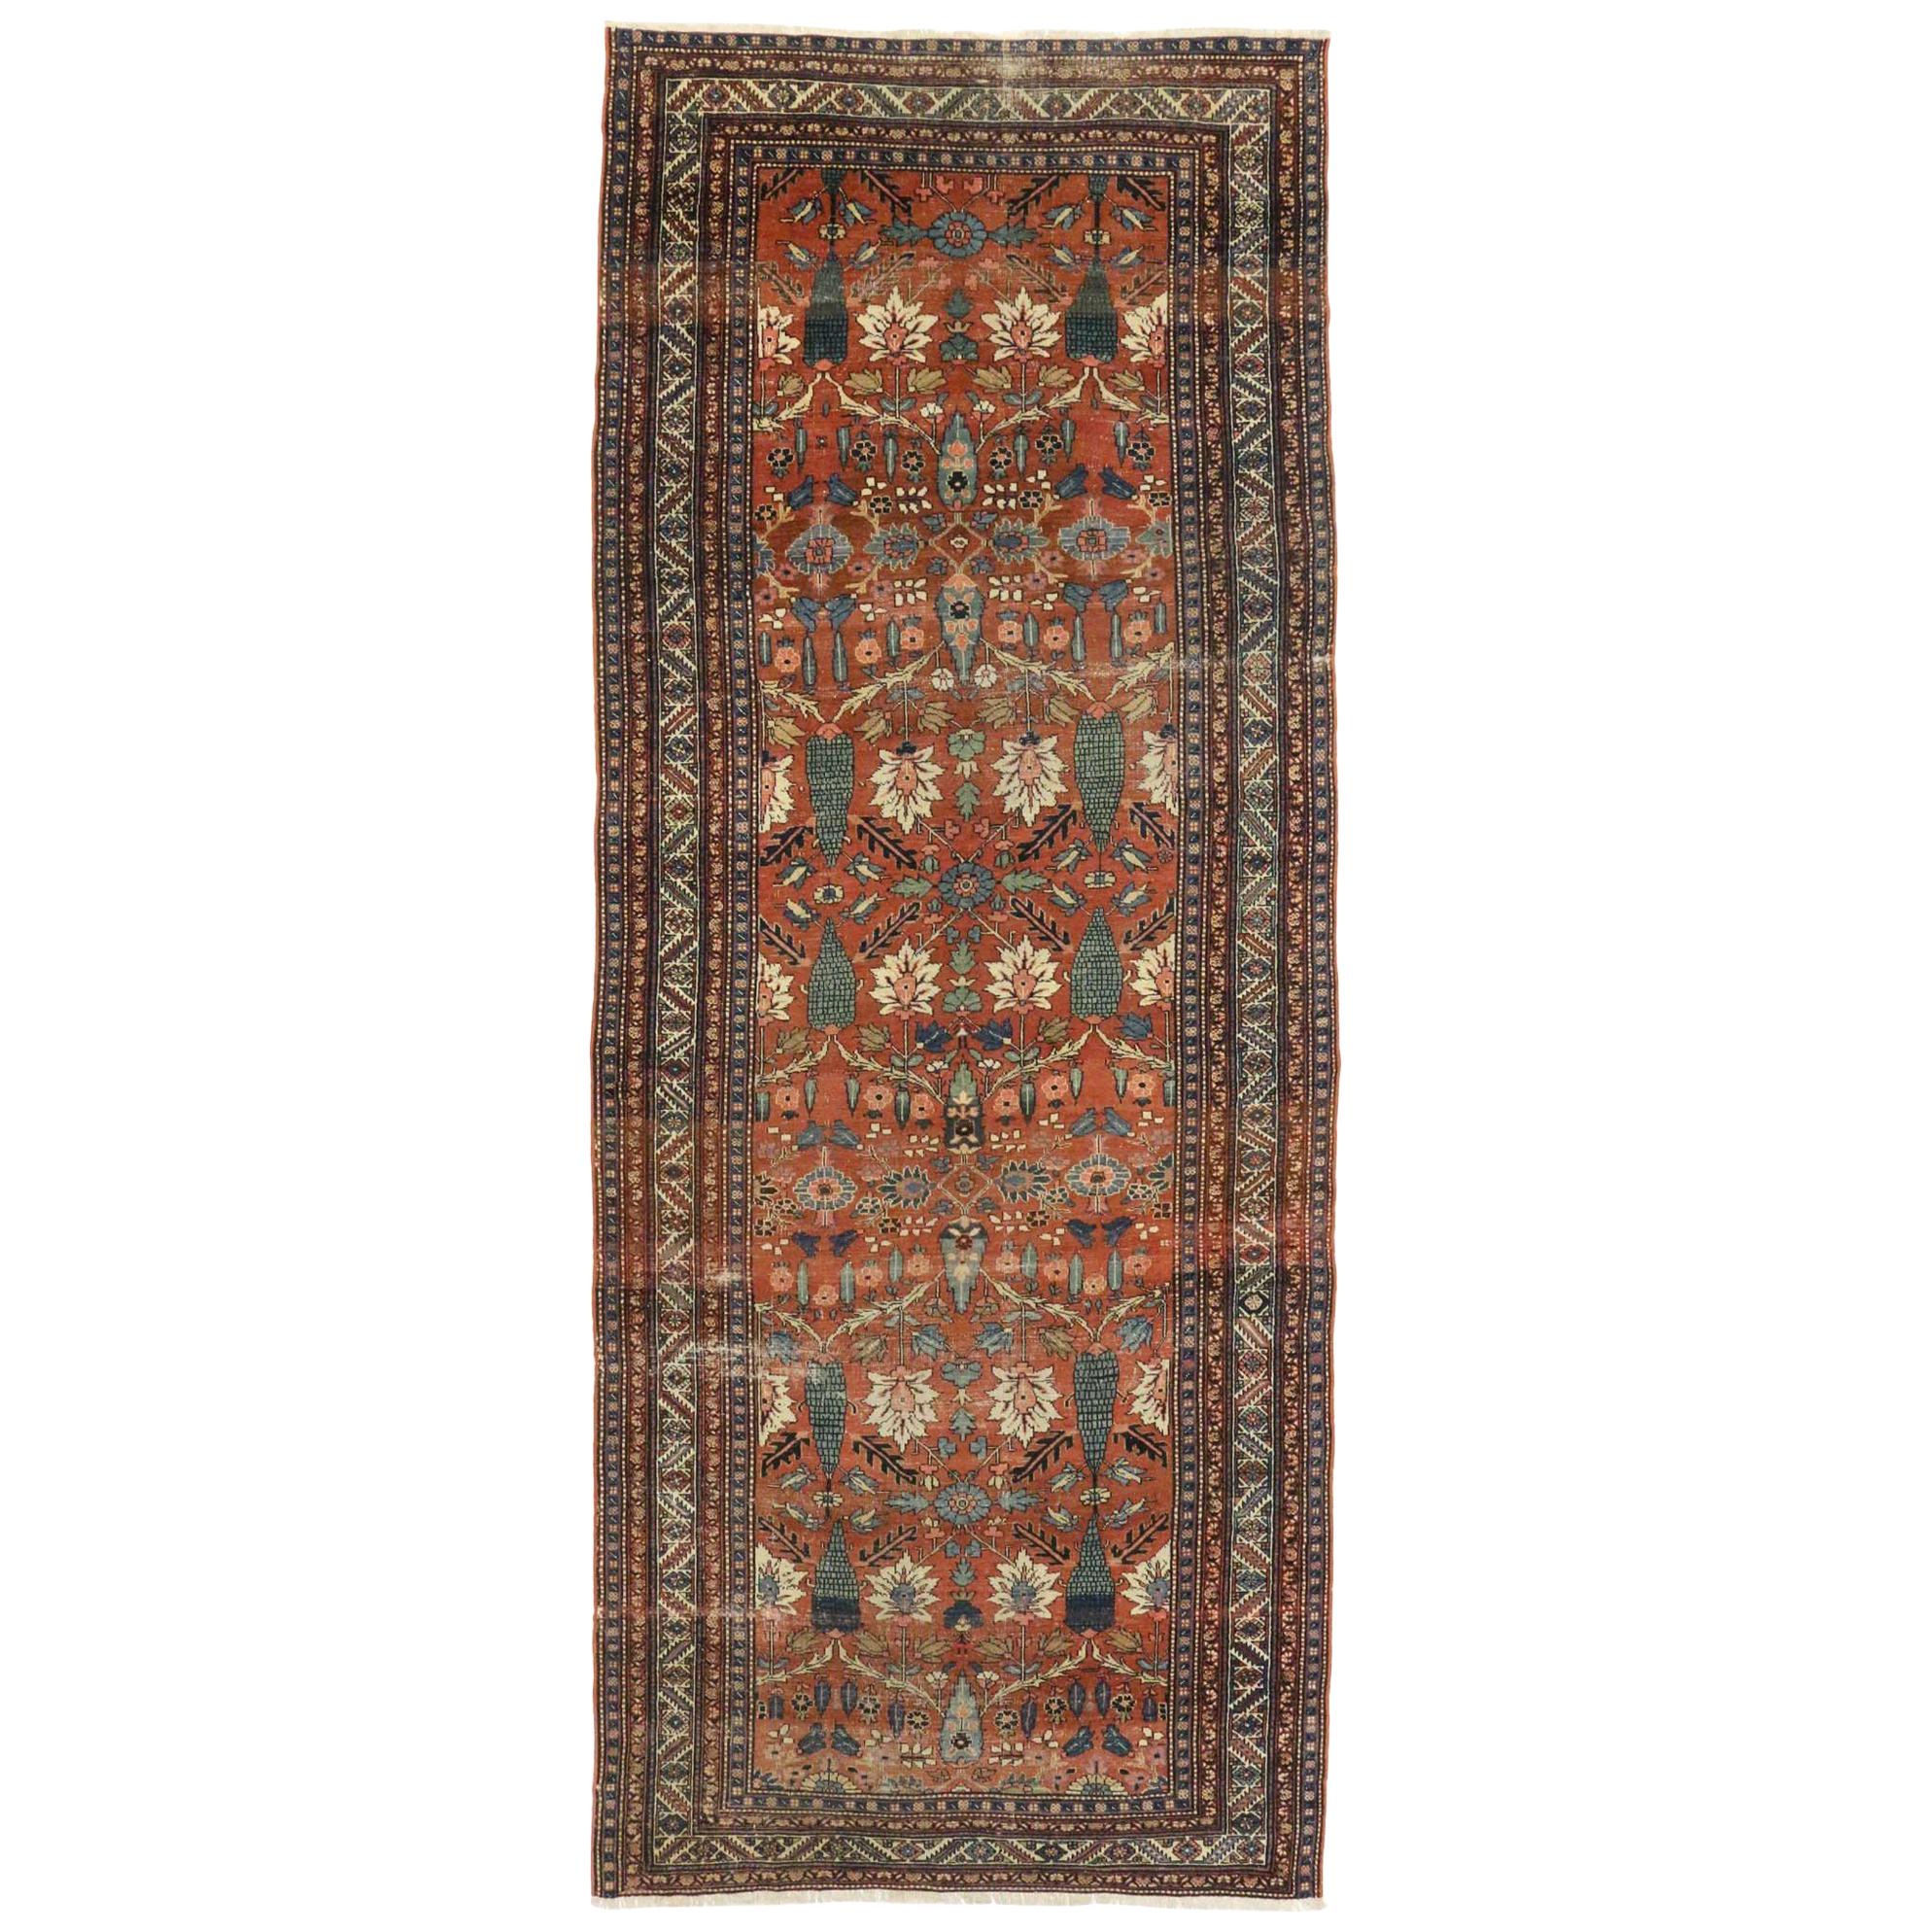 Late 19th Century Antique Persian Bakshaish Gallery Rug with Arts & Crafts Style